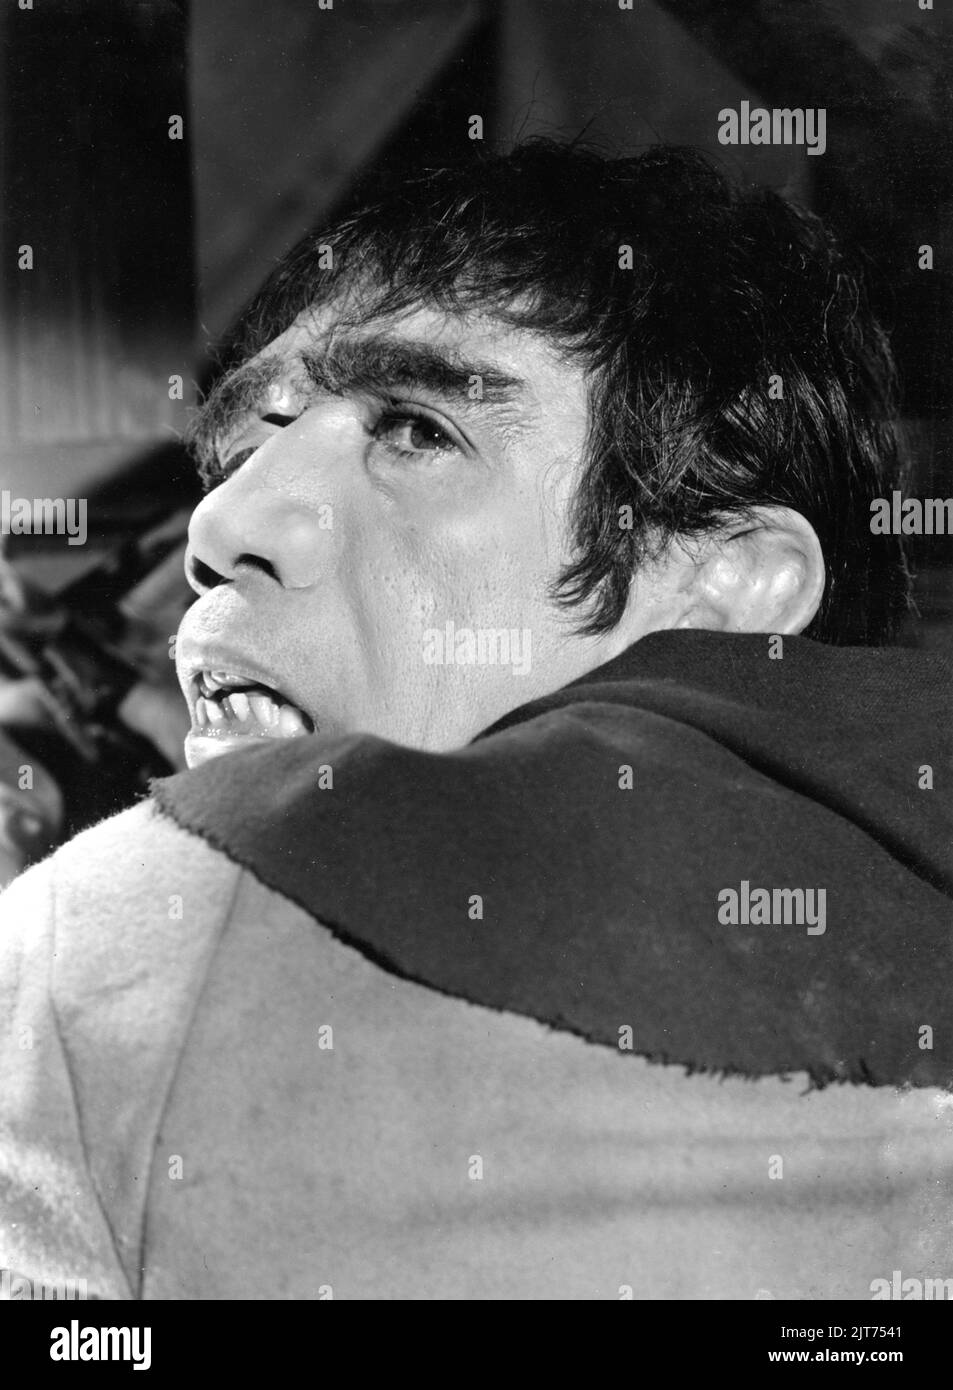 ANTHONY QUINN Portrait as Quasimodo in THE HUNCHBACK OF NOTRE DAME / NOTRE DAME DE PARIS 1956 director JEAN DELANNOY novel Victor Hugo adaptation / dialogue Jean Aurenche and Jacques Prevert music Georges Auric costume design Georges Benda production design Rene Renoux choreographer Leonid Massine producers Raymond and Robert Hakim France - Italy co-production Paris Film Productions / Panitalia Stock Photo